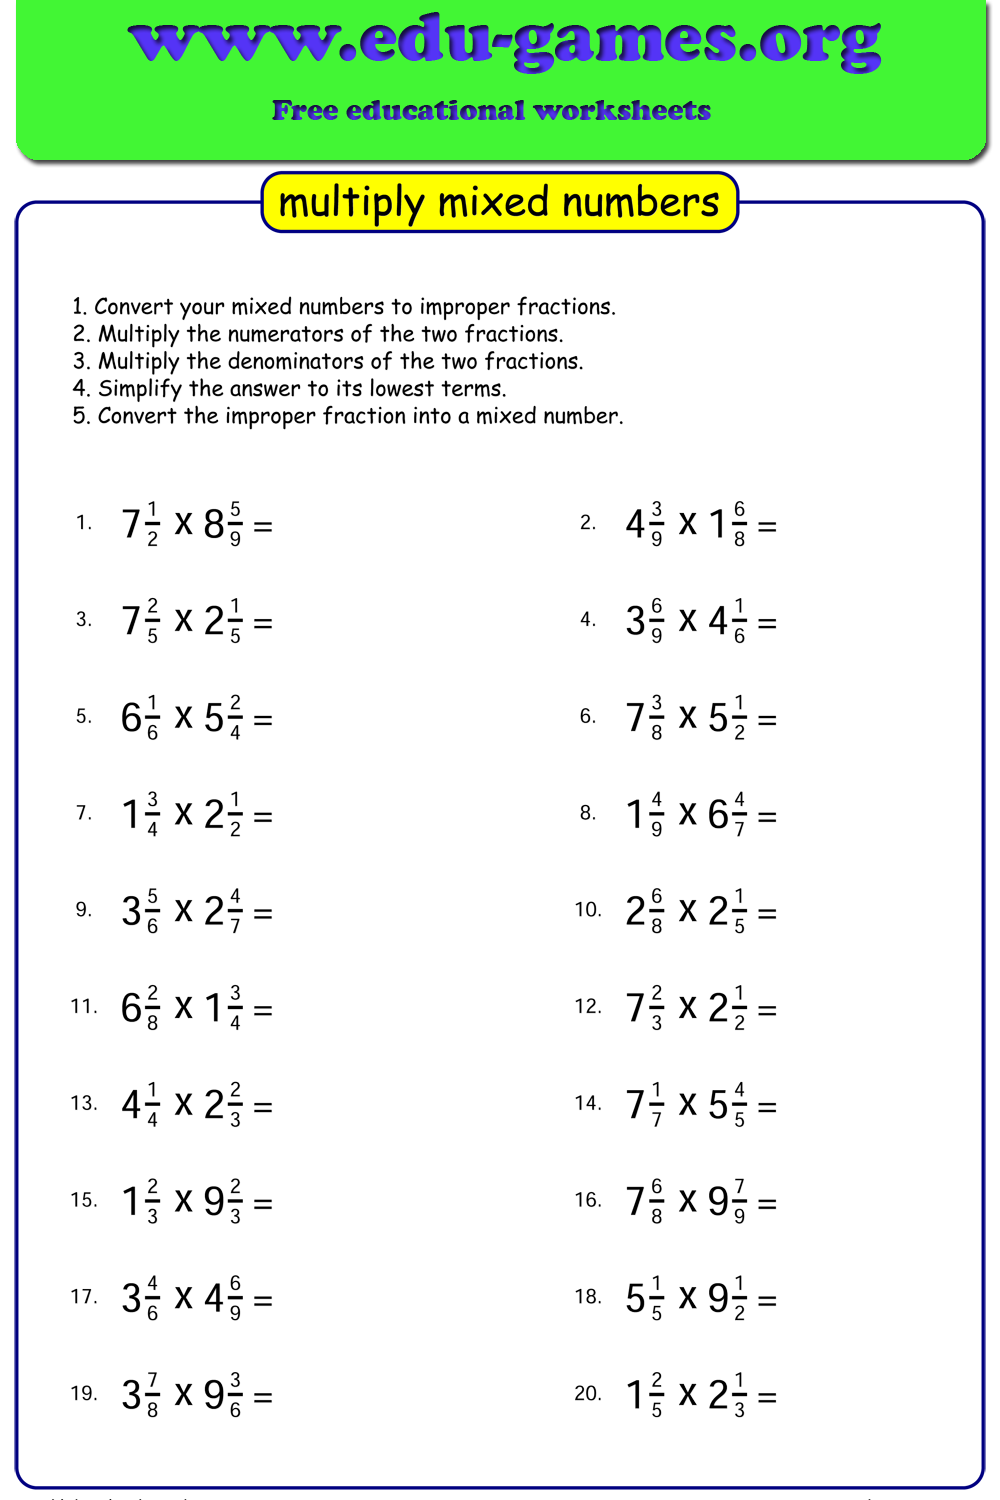 Free Multiplying Mixed Numbers Worksheets For Multiplying Mixed Fractions Worksheet